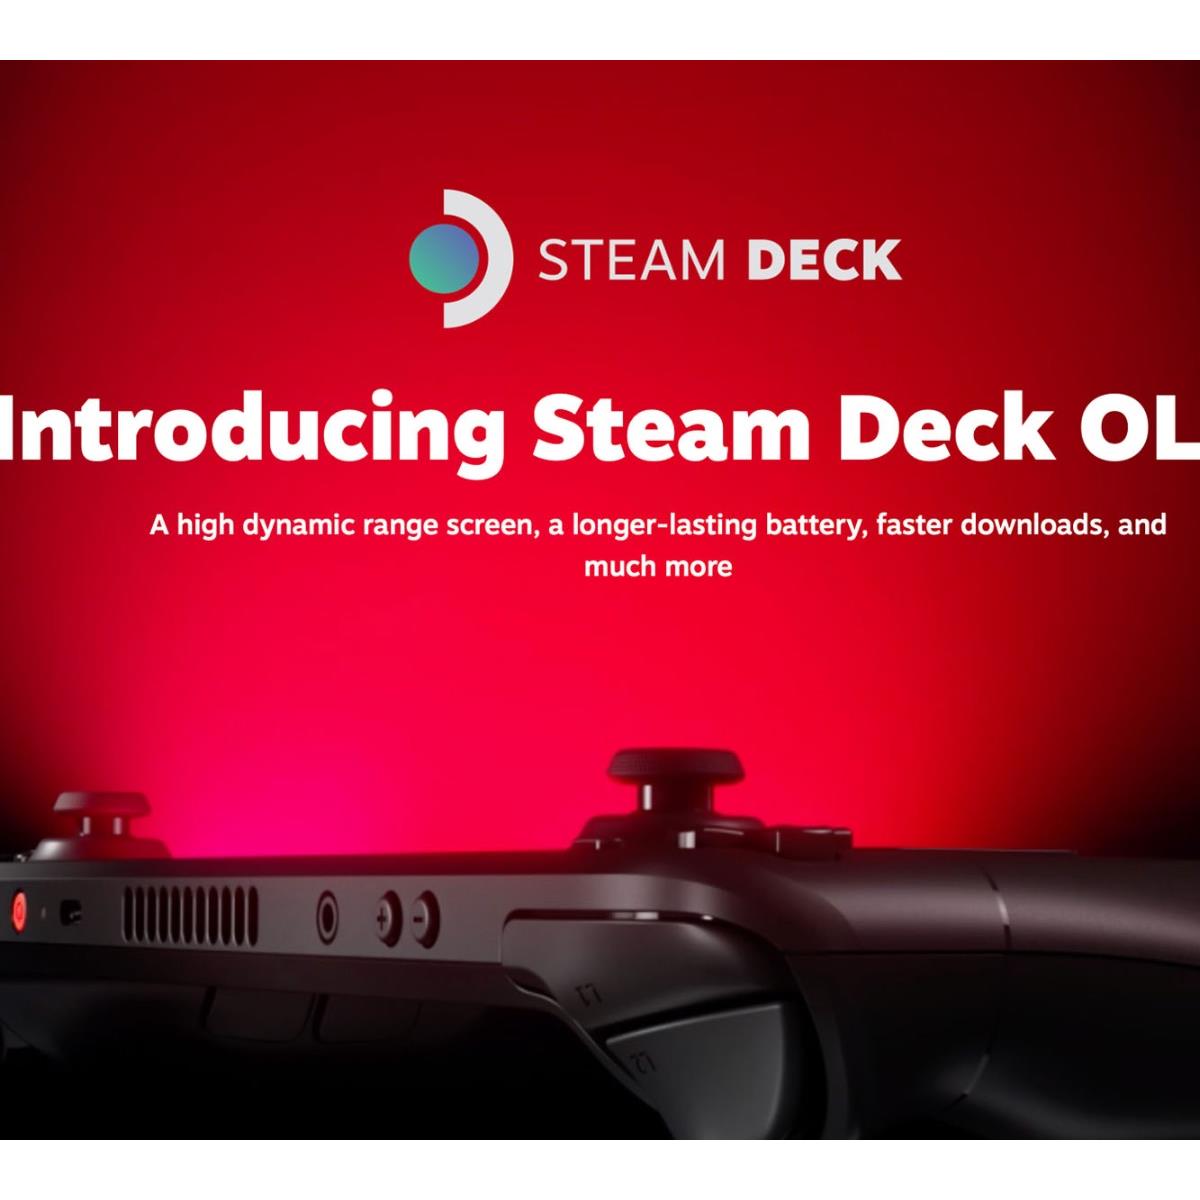 Steam Deck OLED Is a Significant Part of Our Roadmap: Valve, steam deck 